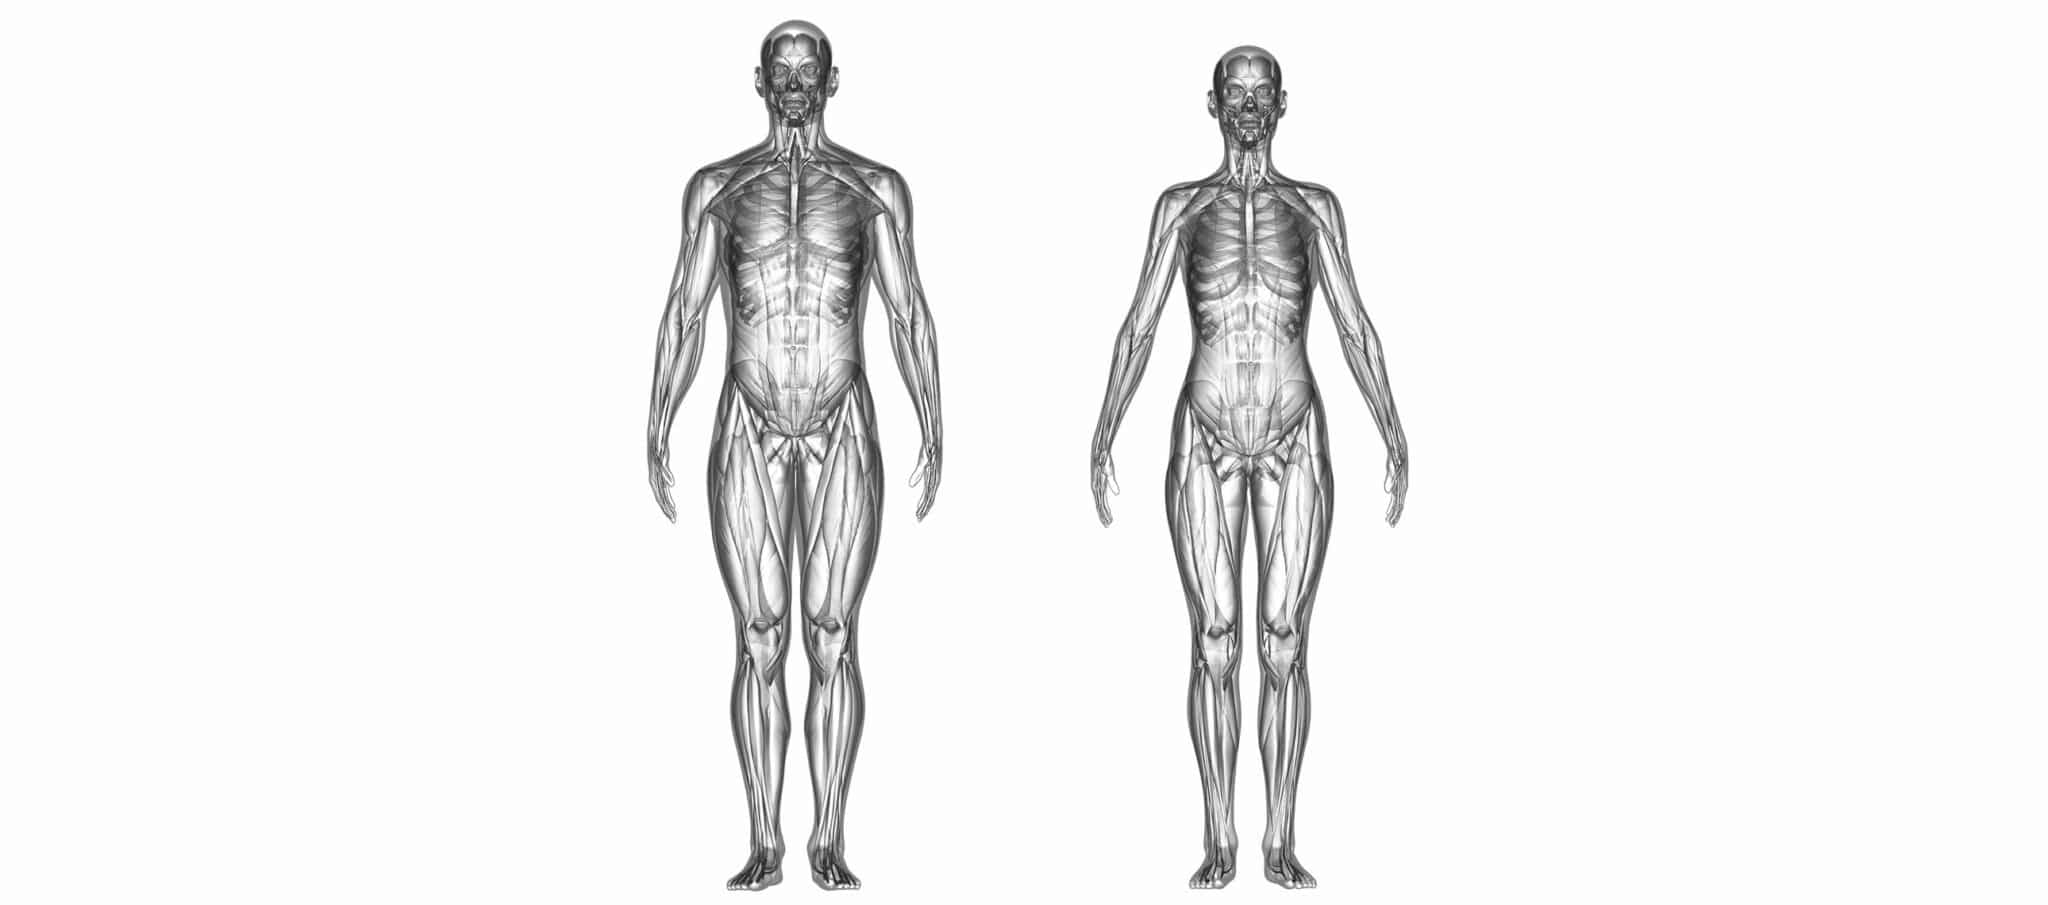 The aim of postural analysis is to determine how each individual works to enable the subject to reduce the excess strain.